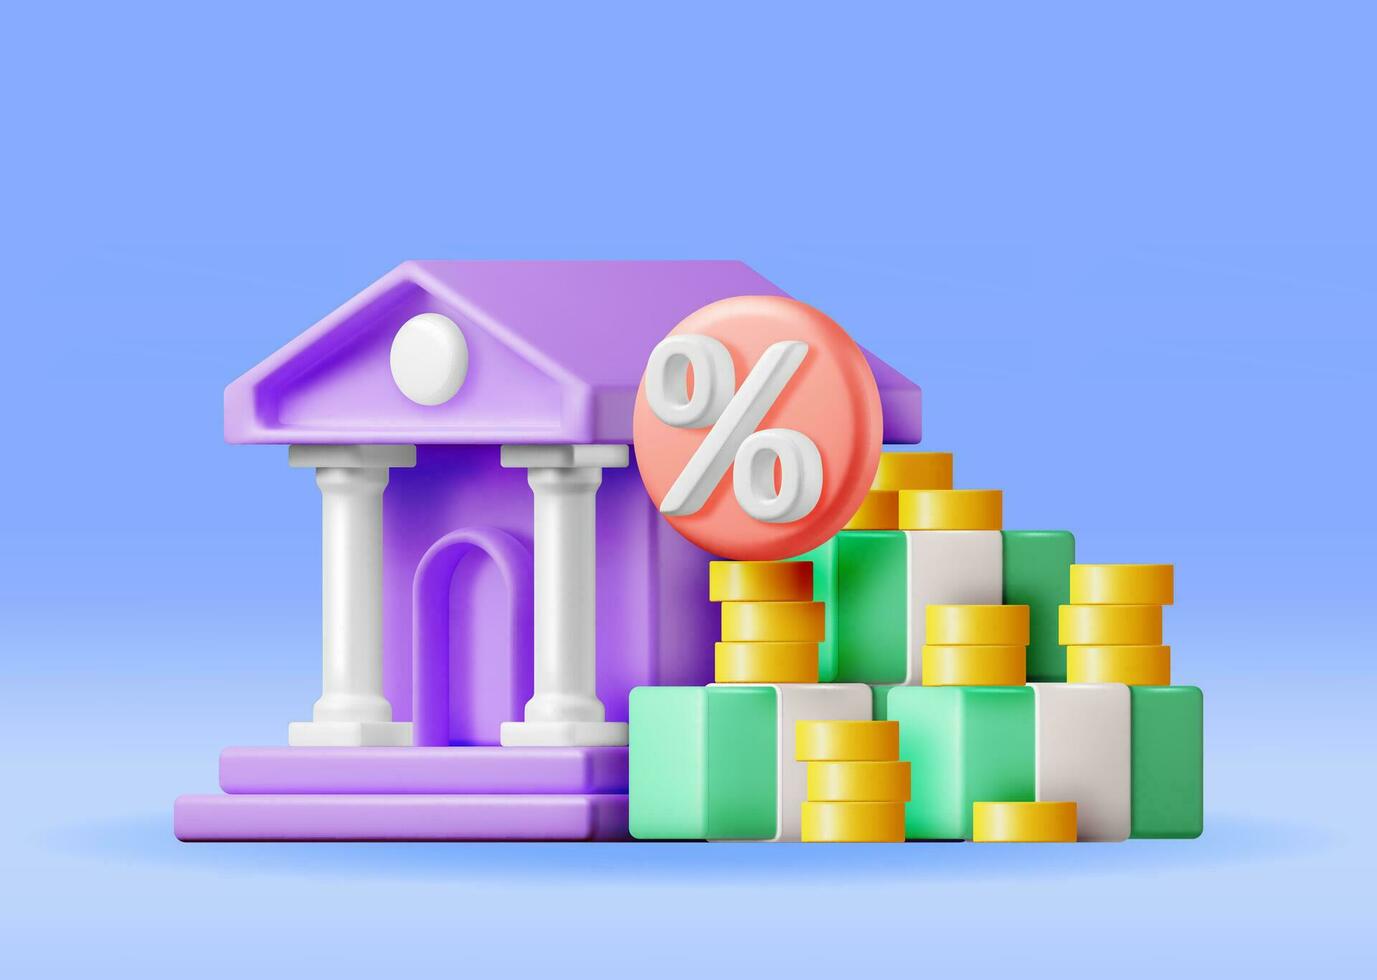 3D Growth Bank with Building Cash Money. Render Bank with Money and Percentage Symbol. Financial, Business Investment Financial Market Trade. Money and Banking. Vector Illustration